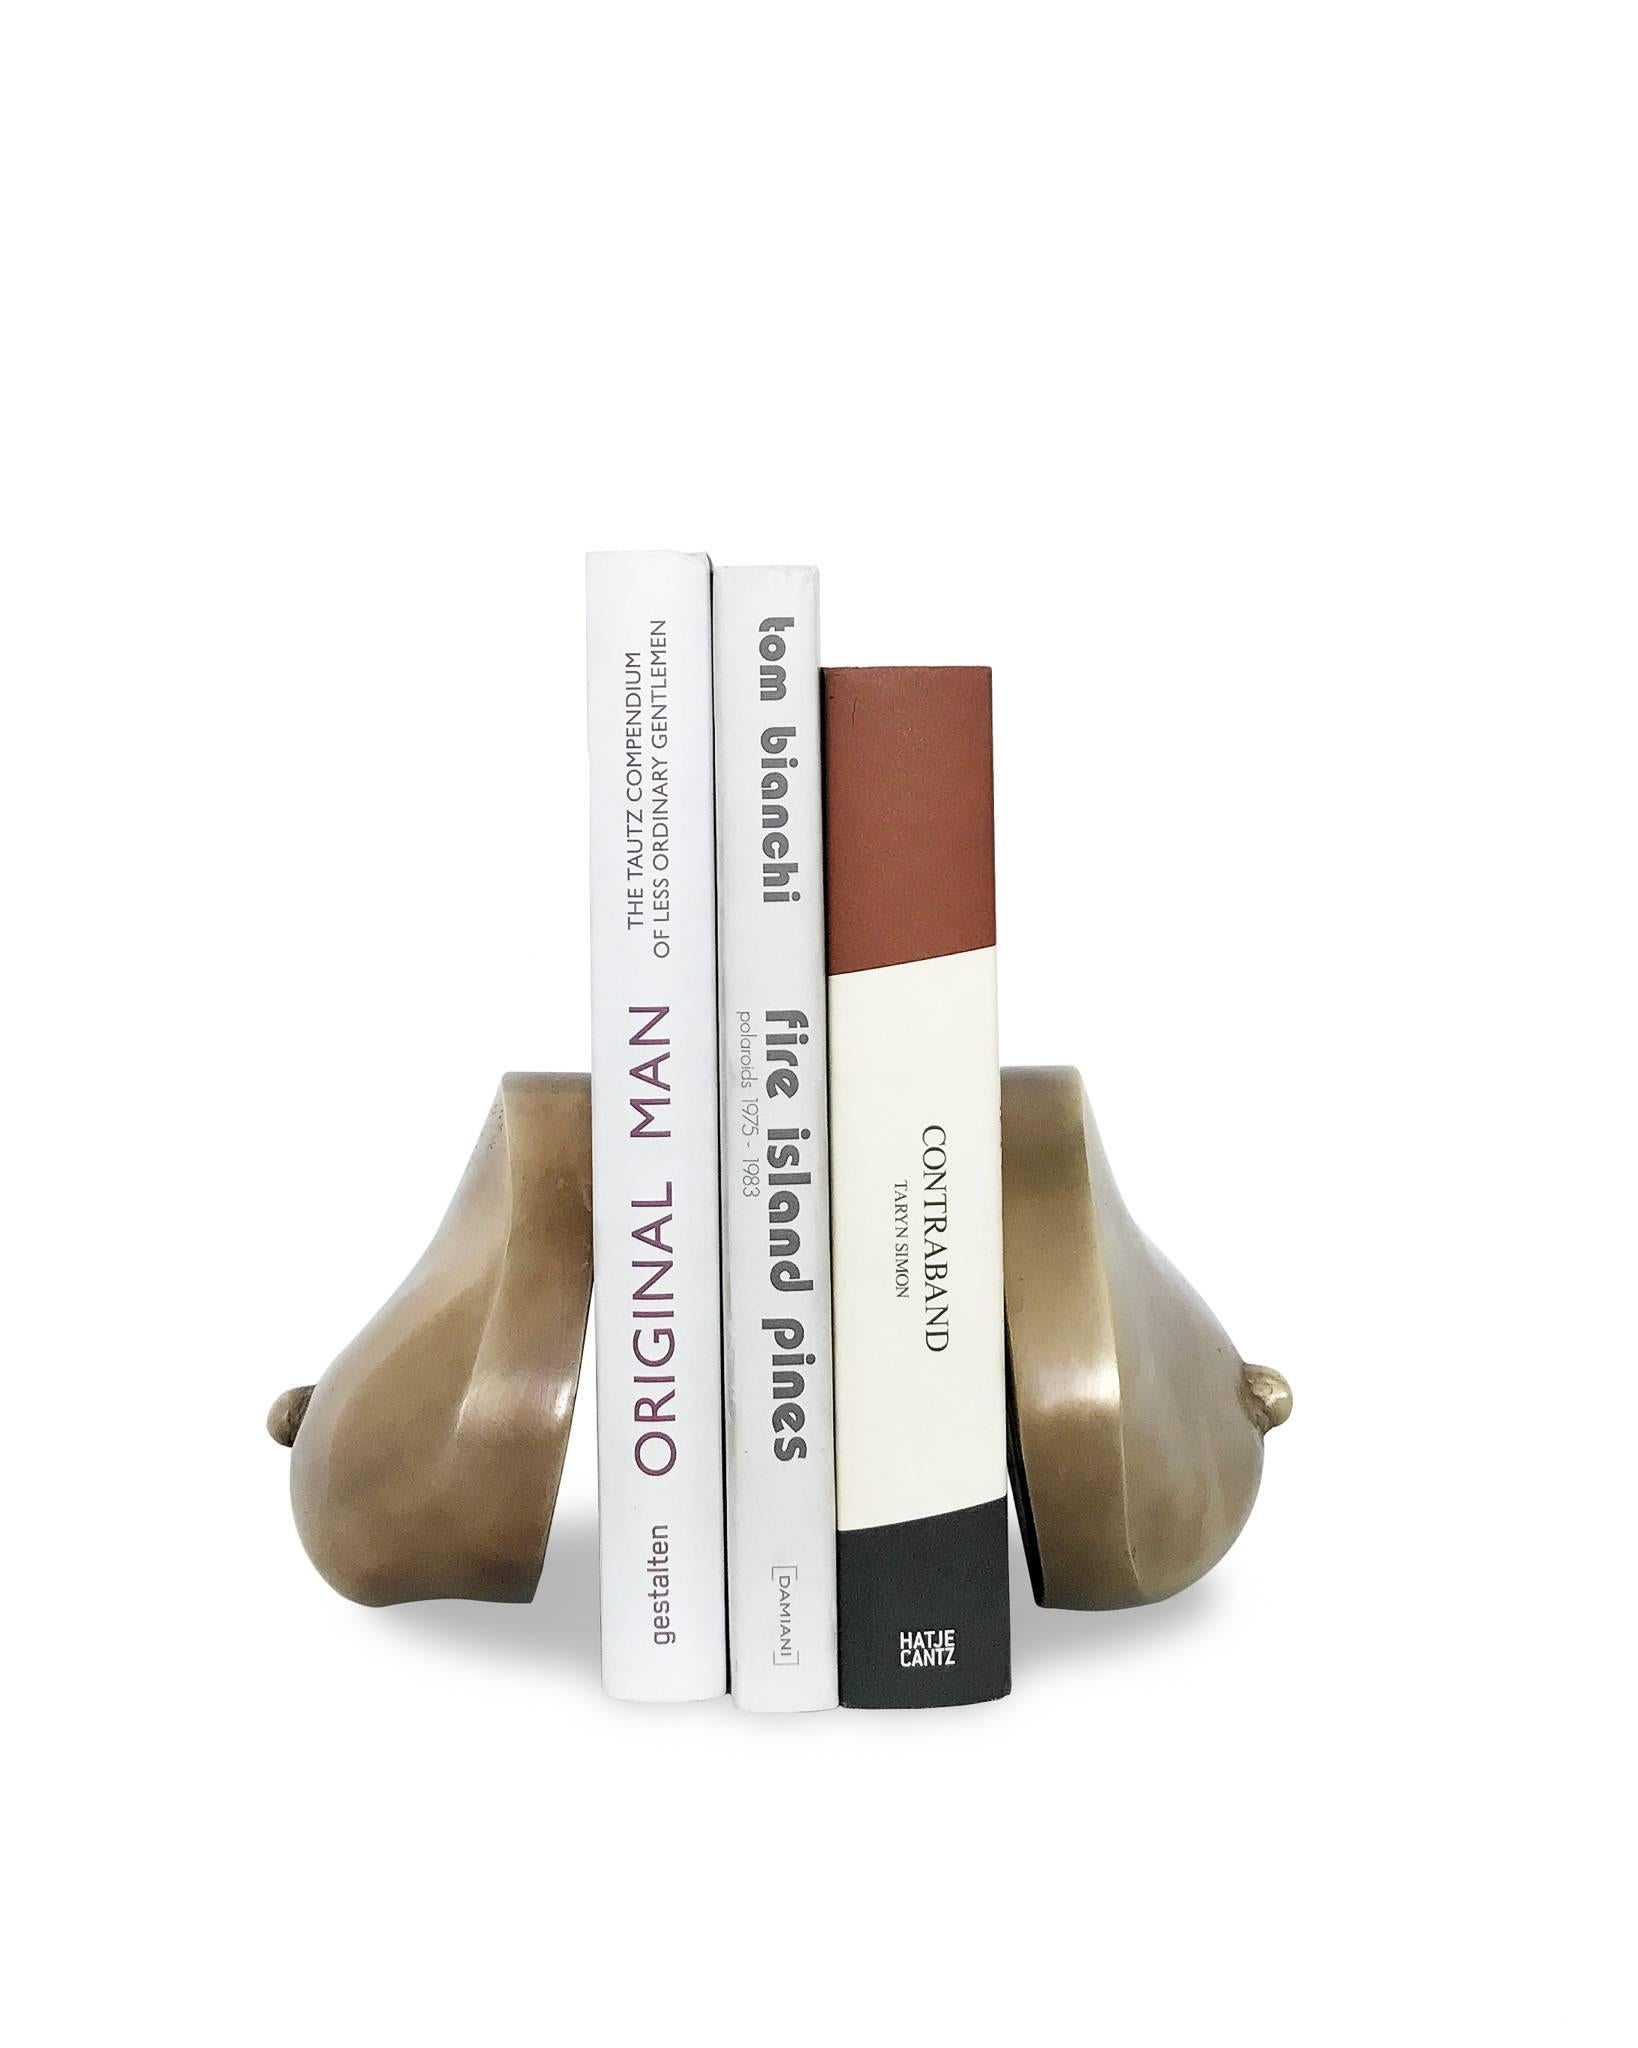 Contemporary The GiGi Bookends by Black Market Design Lab For Sale